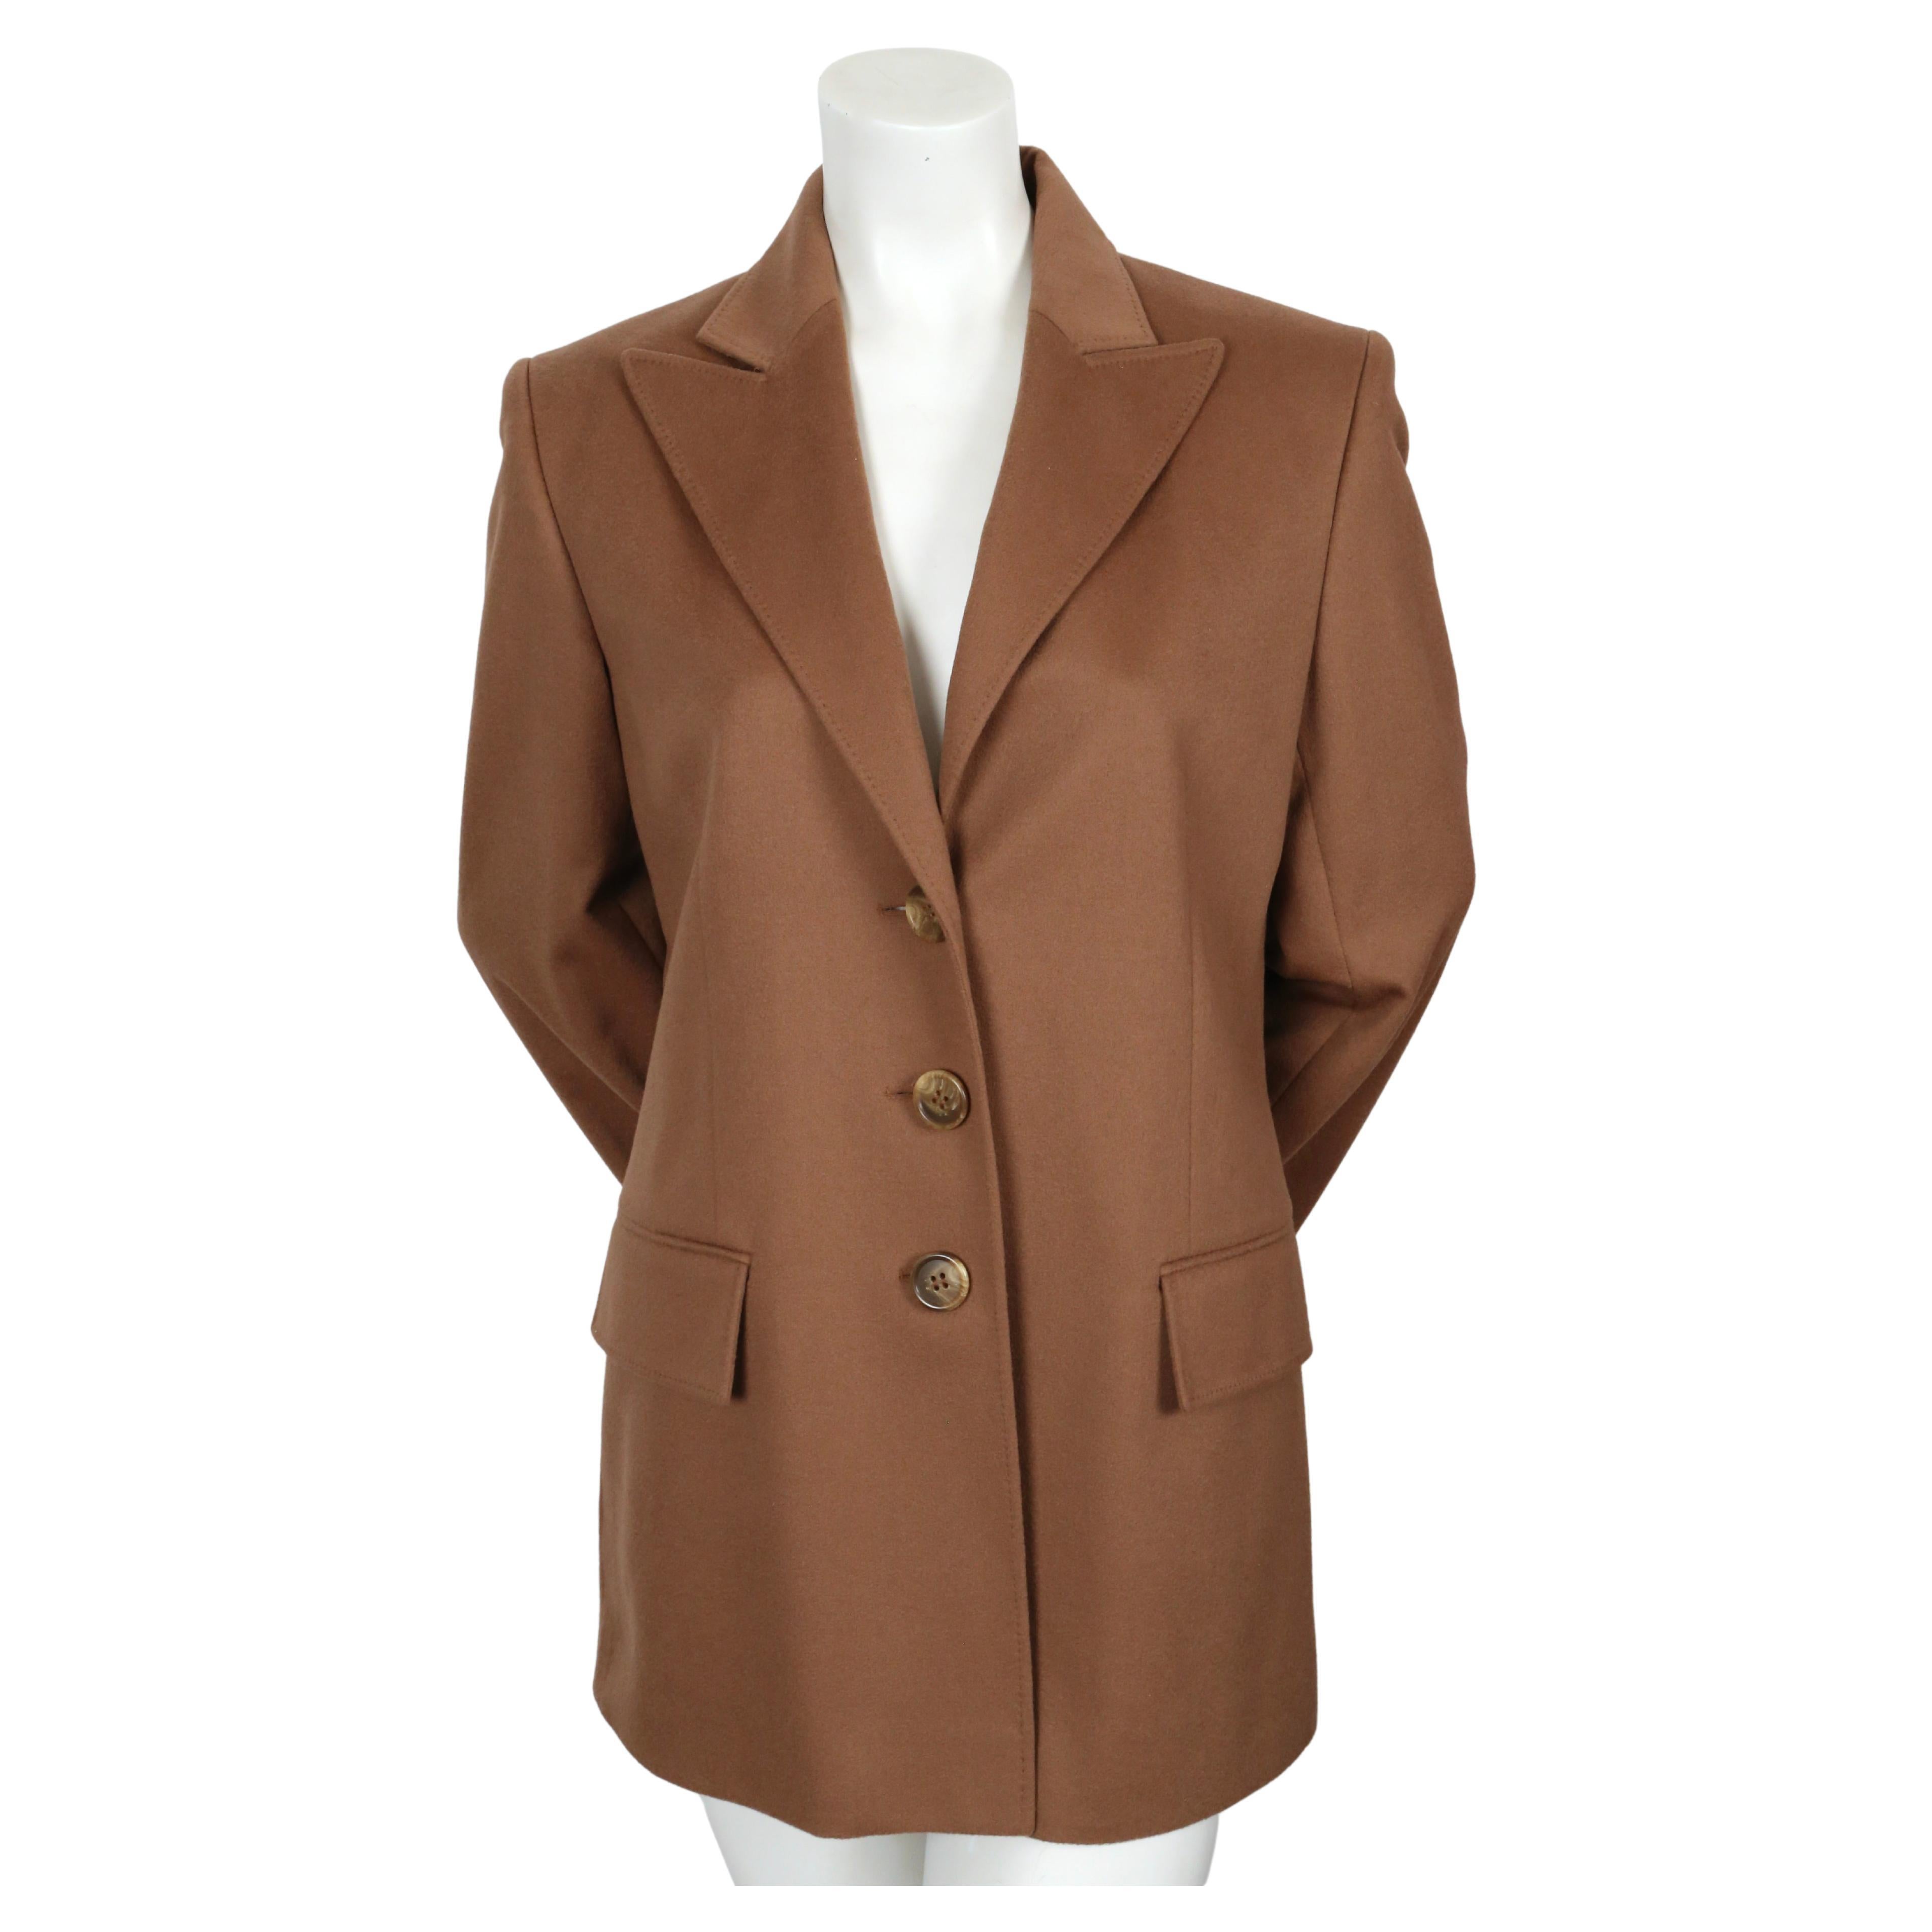 Classic sienna-brown cashmere blazer from Christian Dior dating to the early 2000's. Labeled a French 40. Approximate measurements: shoulder 16.75